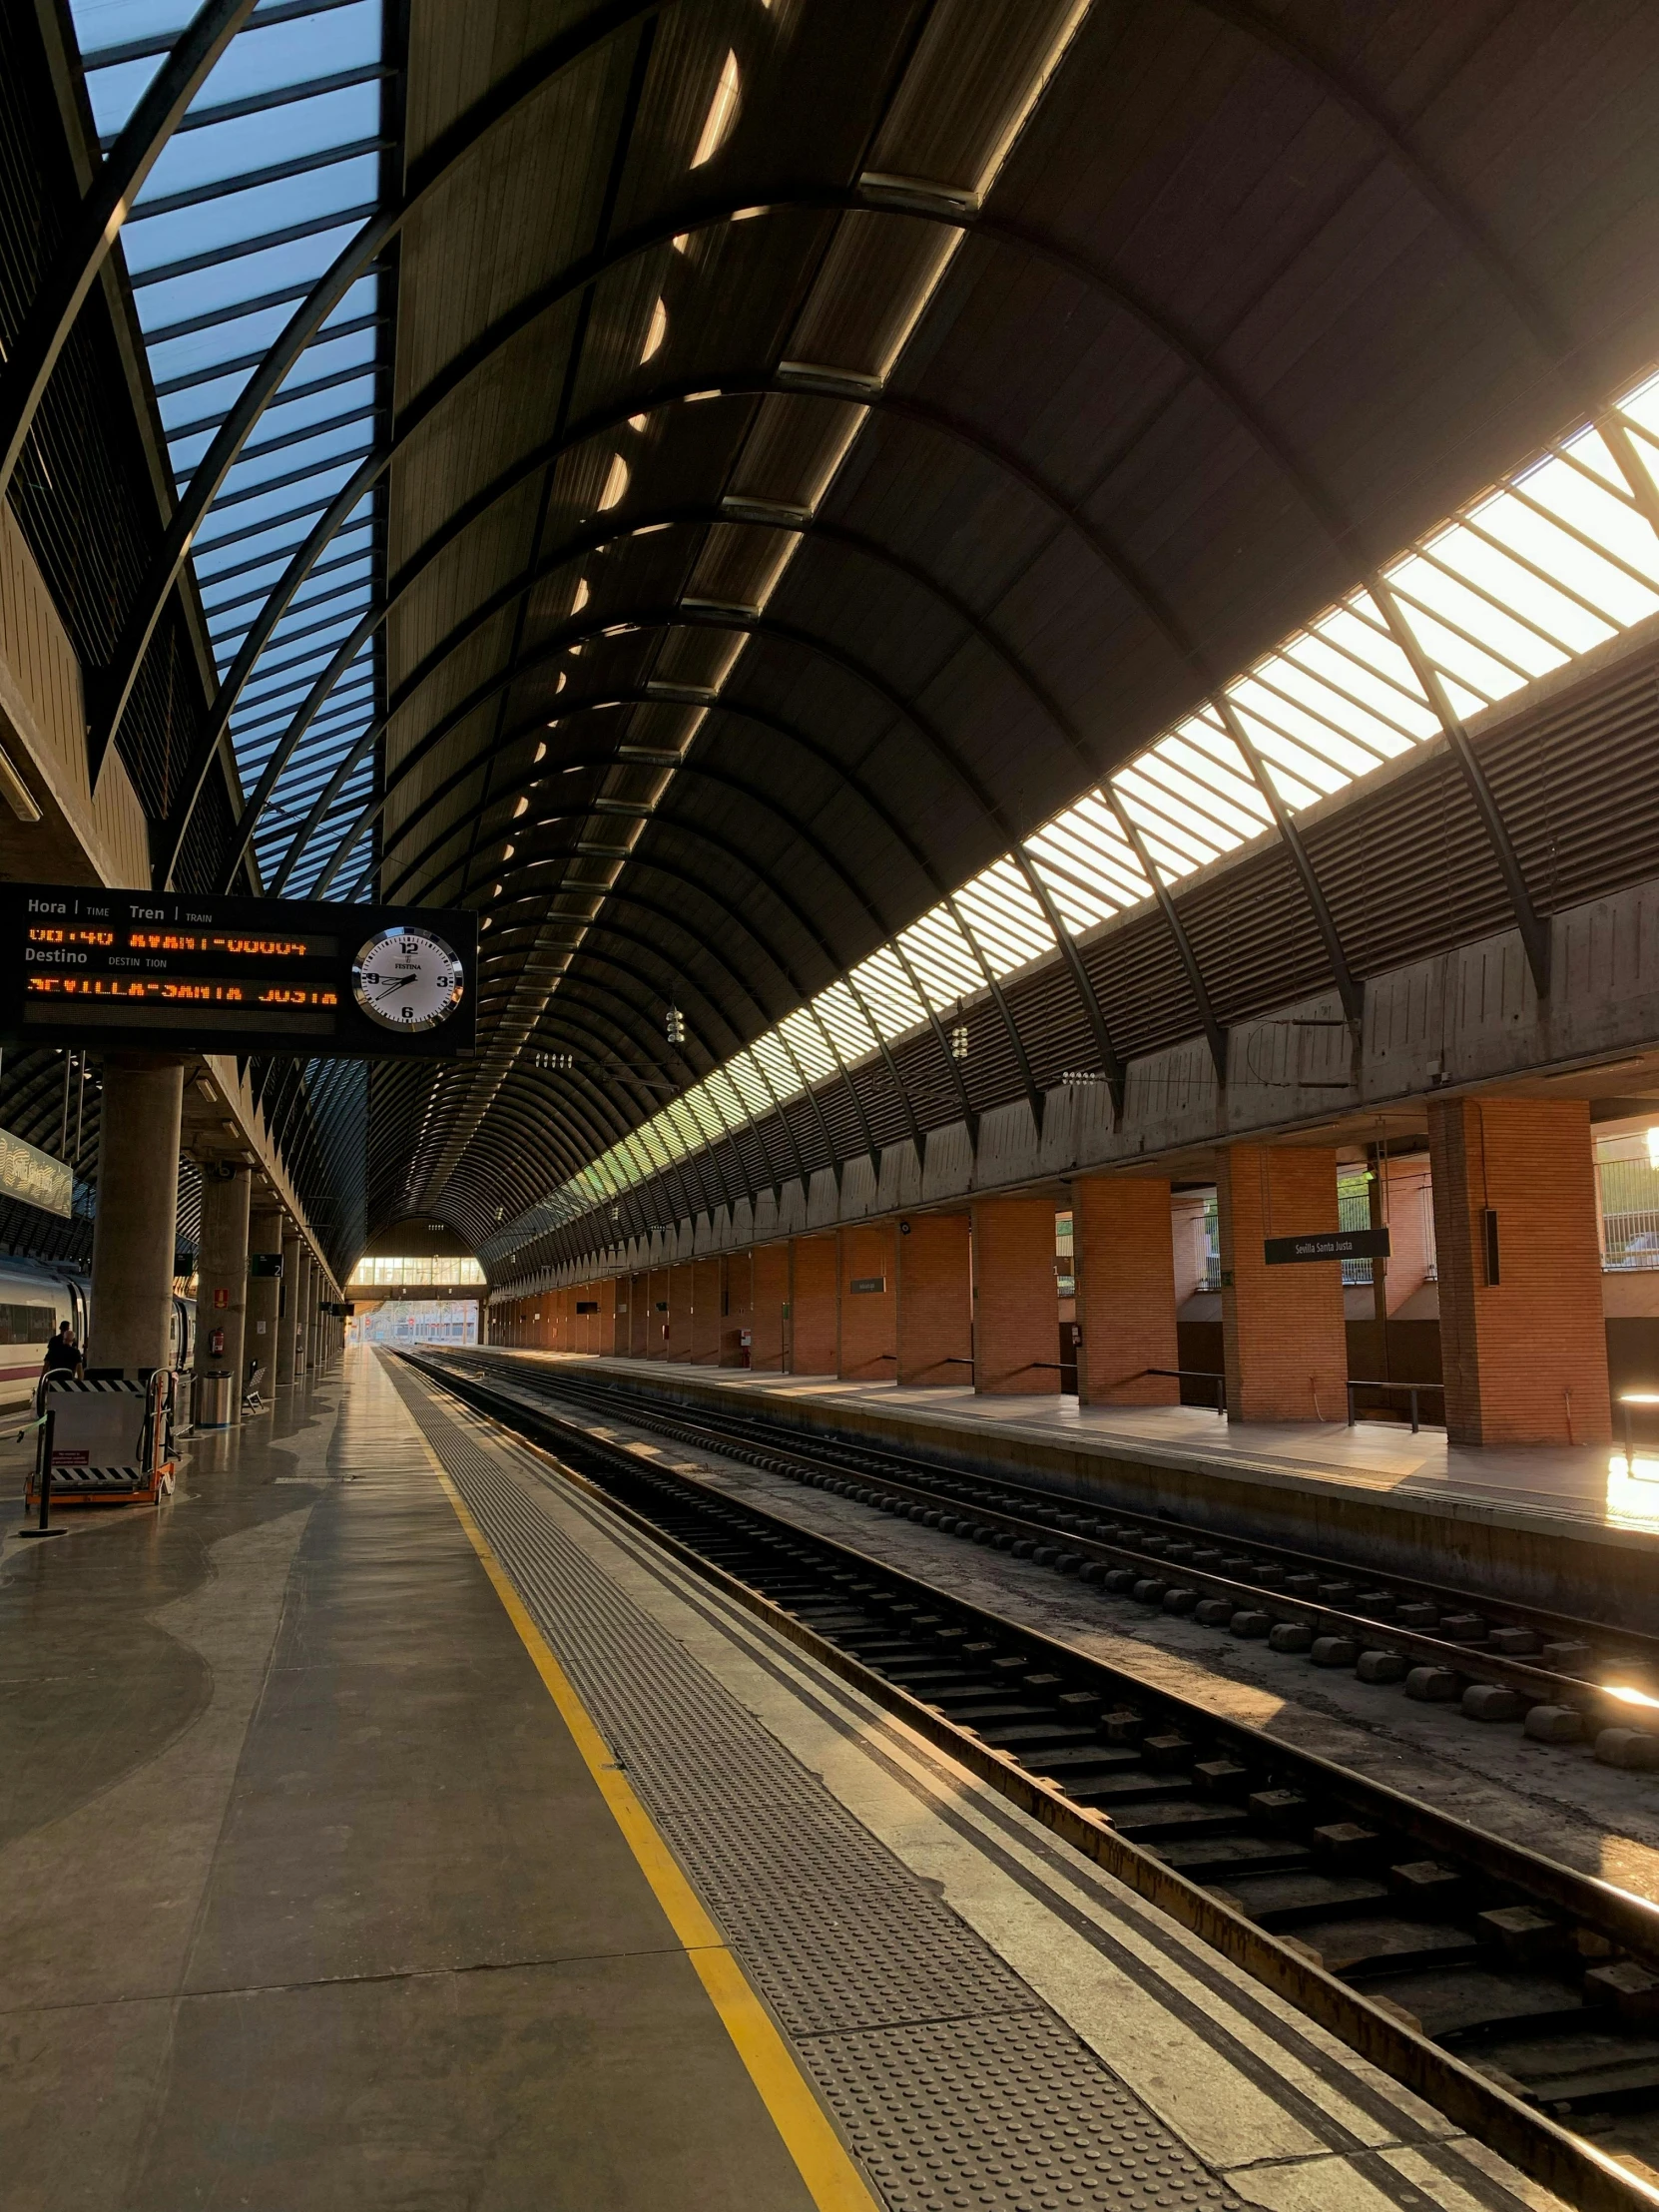 the view of a train platform, showing a ceiling in a very large area